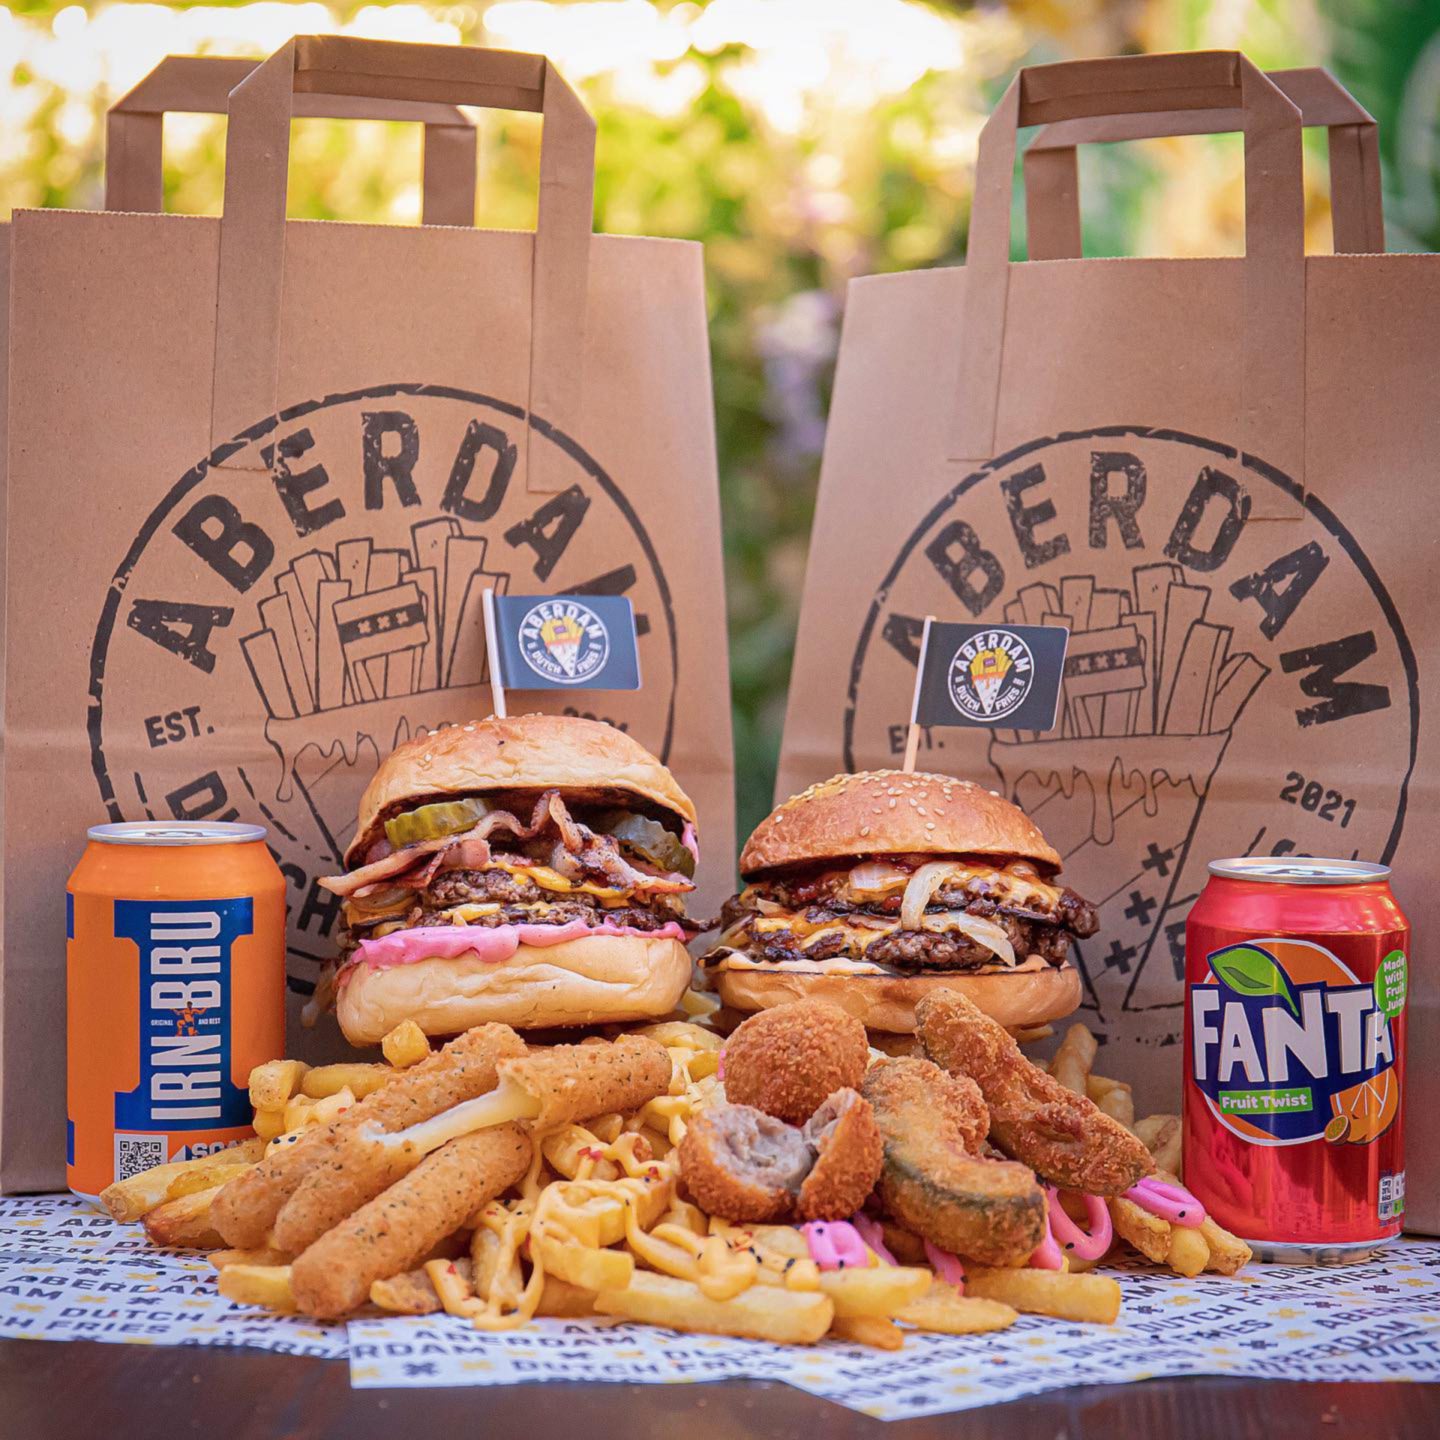 Aberdam burgers and dirty fries